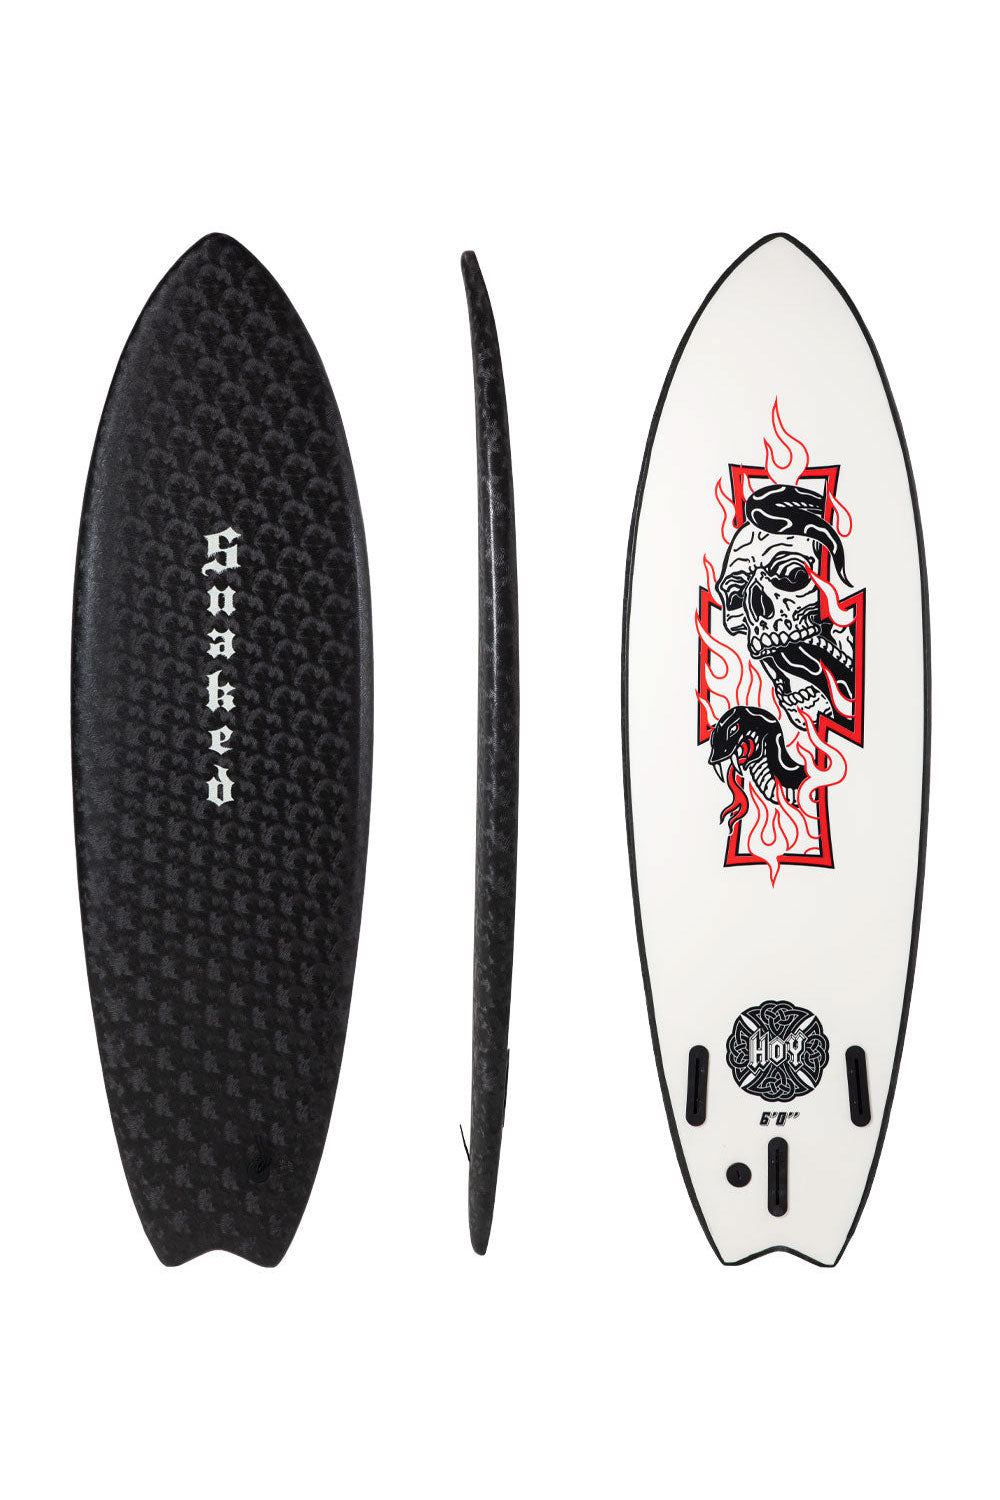 HOY Skull 6.0 Snaked Softboard - Comes with fins